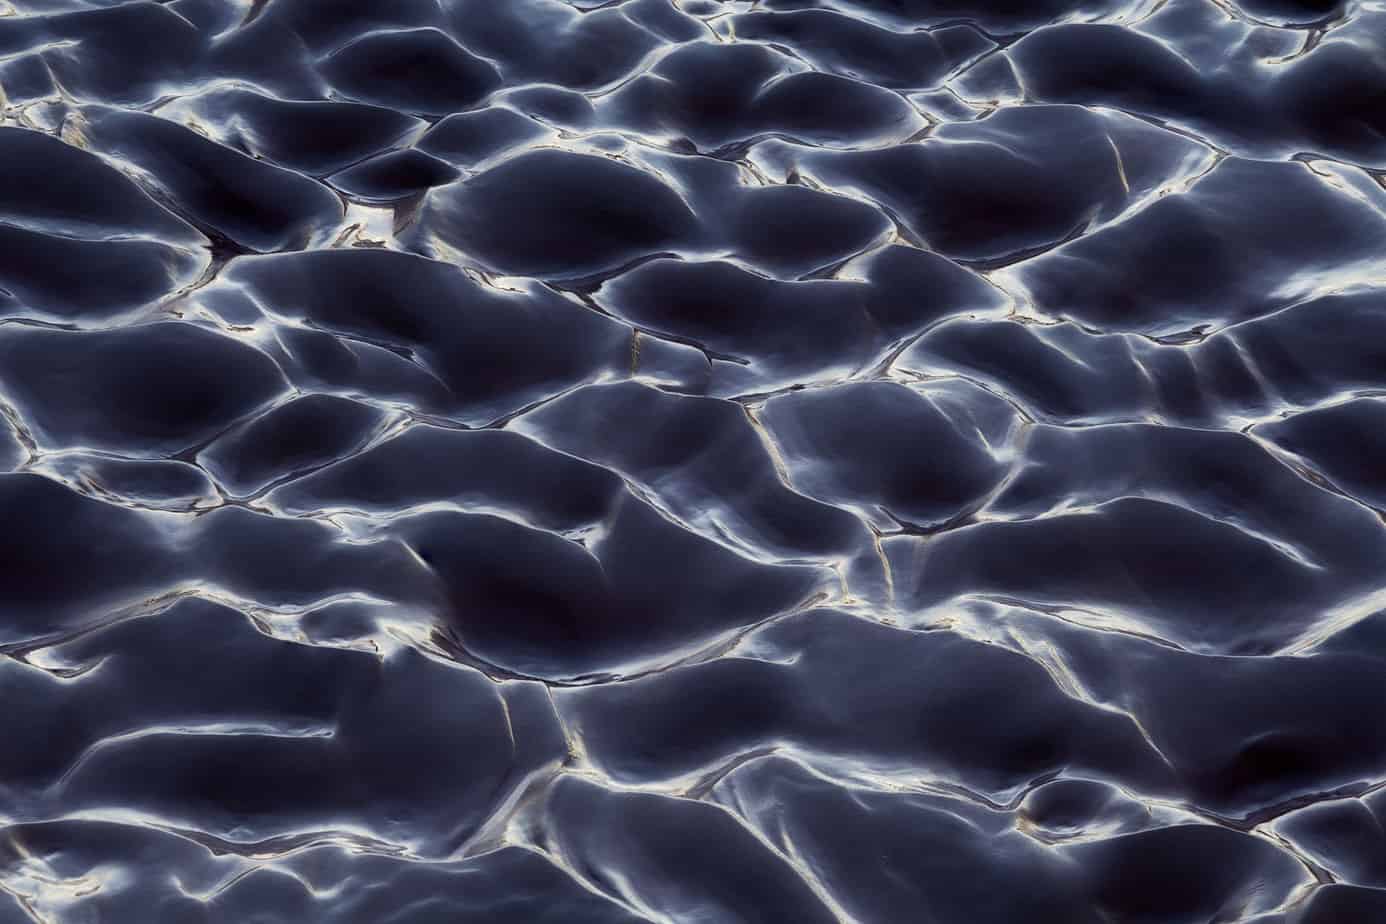 A flash flood created an expanse of wet rippled sand in Death Valley National Park (California).